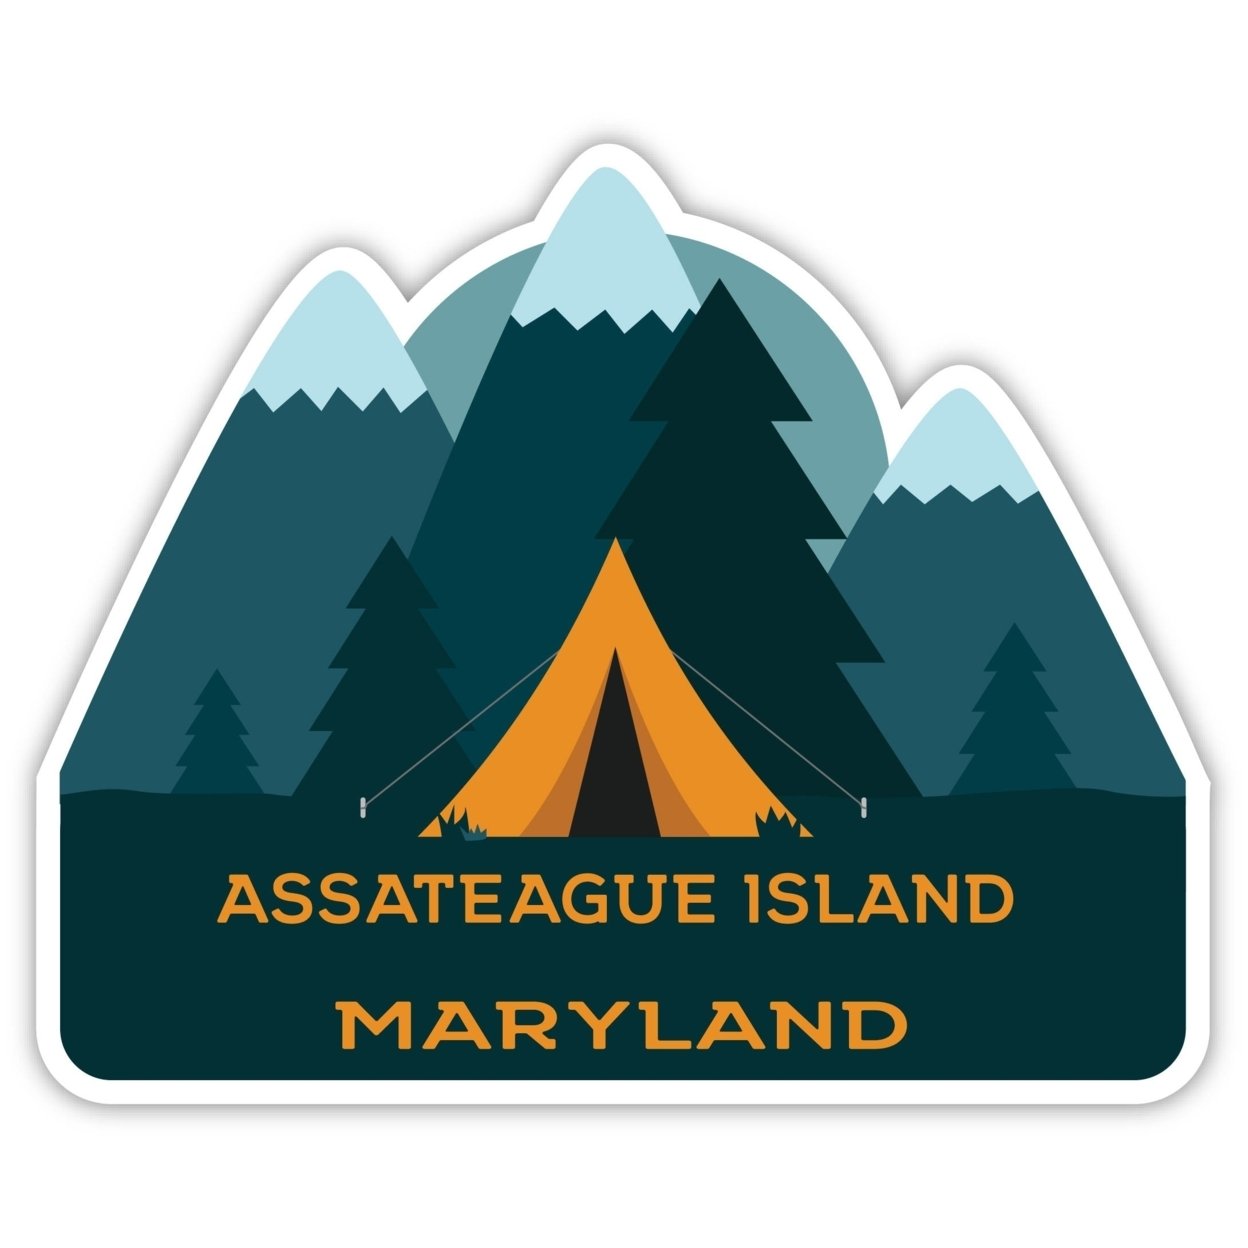 Assateague Island Maryland Souvenir Decorative Stickers (Choose Theme And Size) - 4-Pack, 12-Inch, Tent